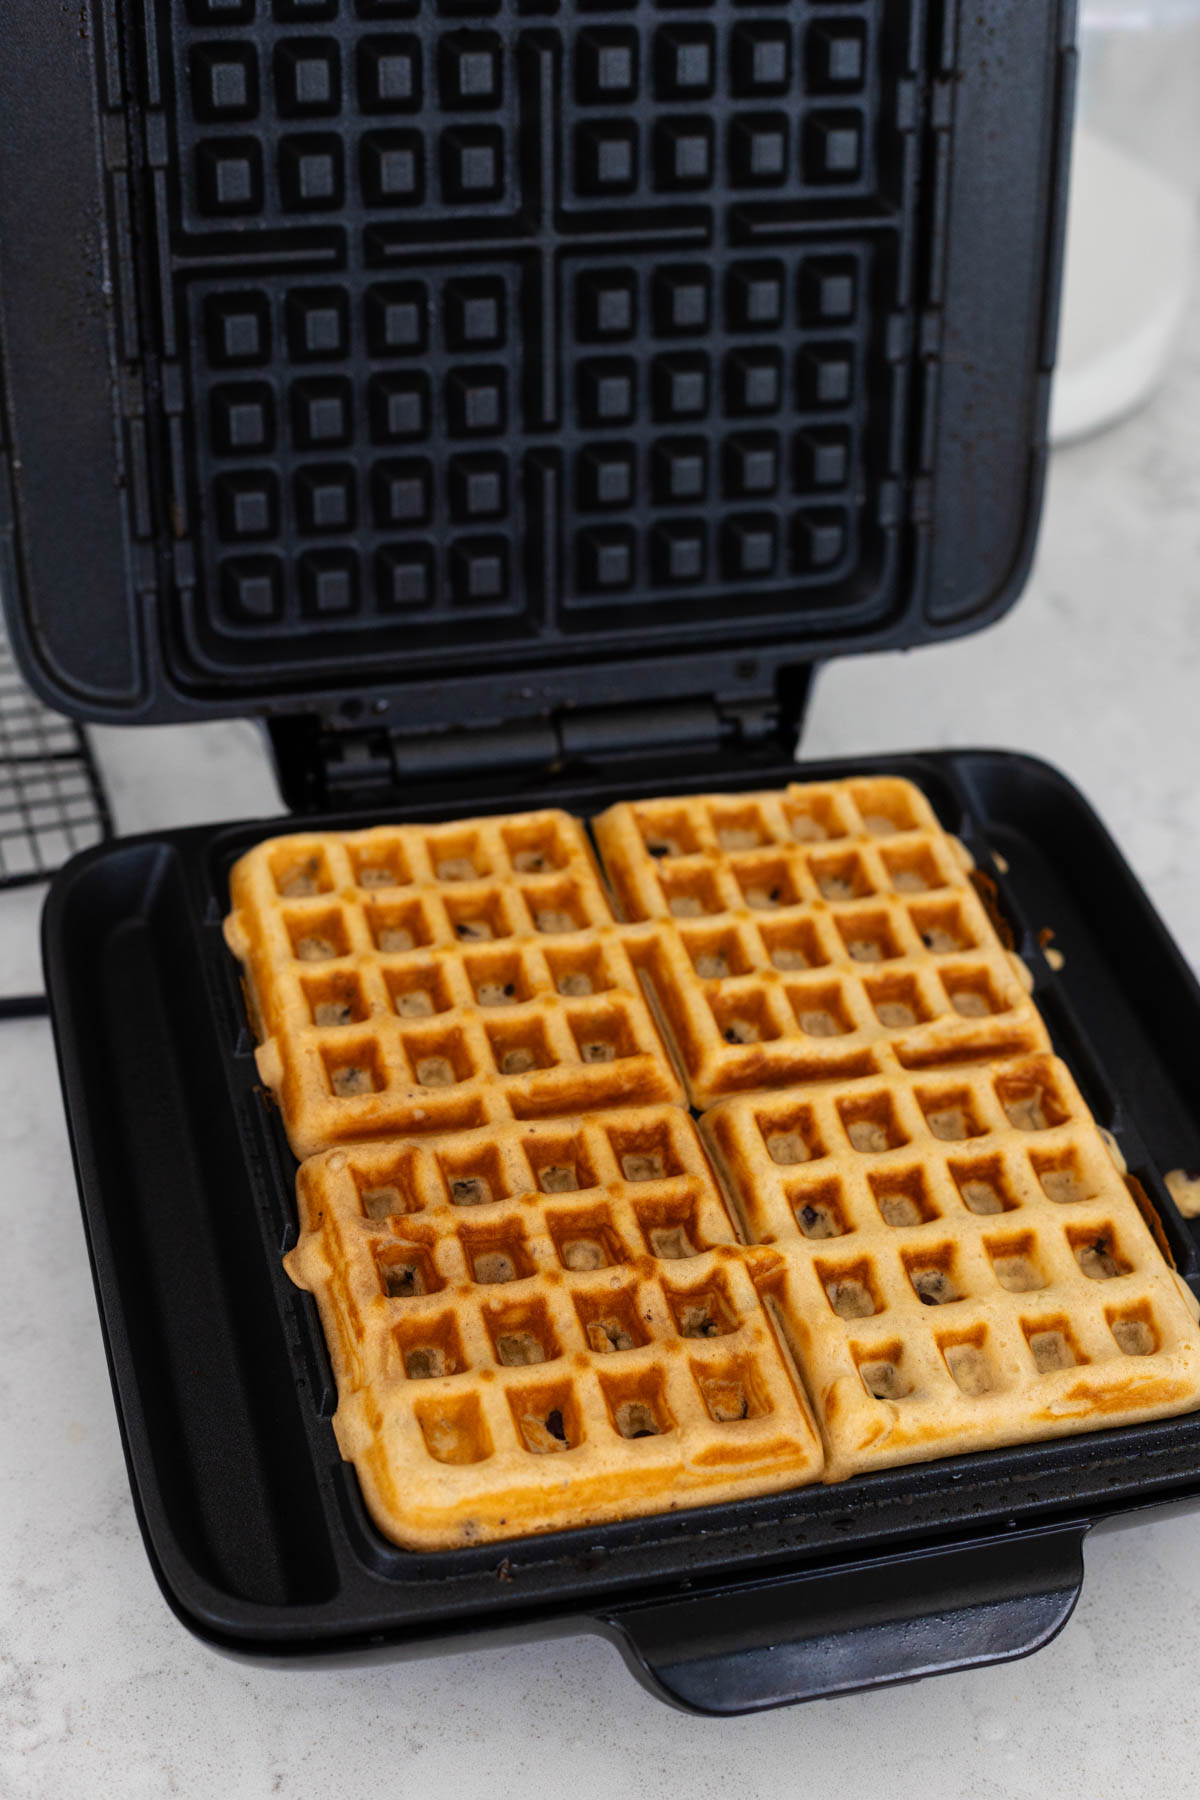 The peanut butter waffles have been fully cooked and are a gorgeous dark golden brown color.